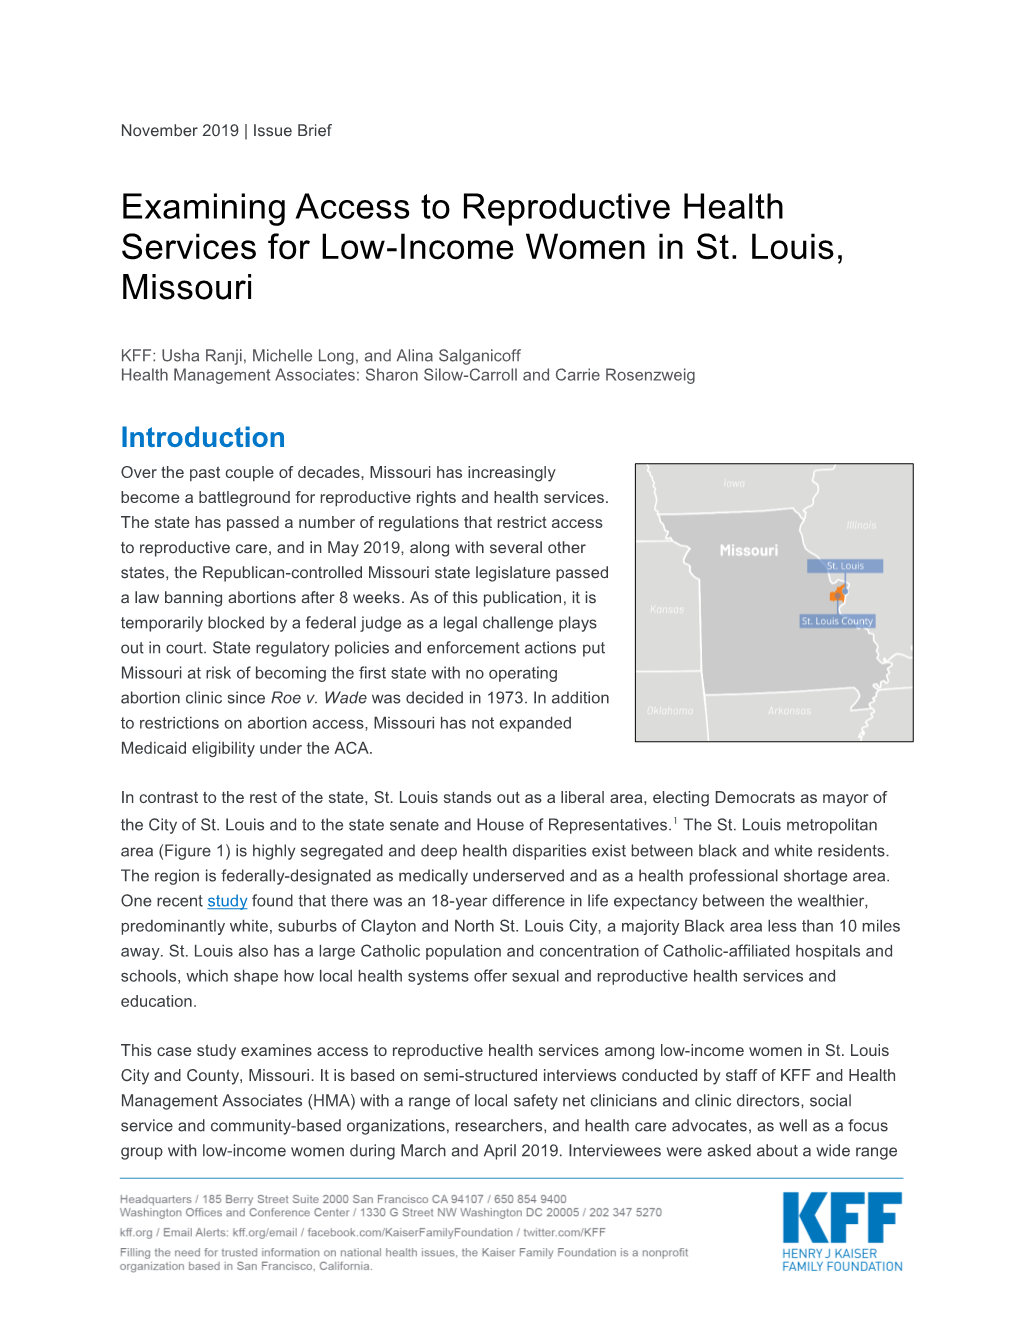 Examining Access to Reproductive Health Services for Low-Income Women in St. Louis, Missouri